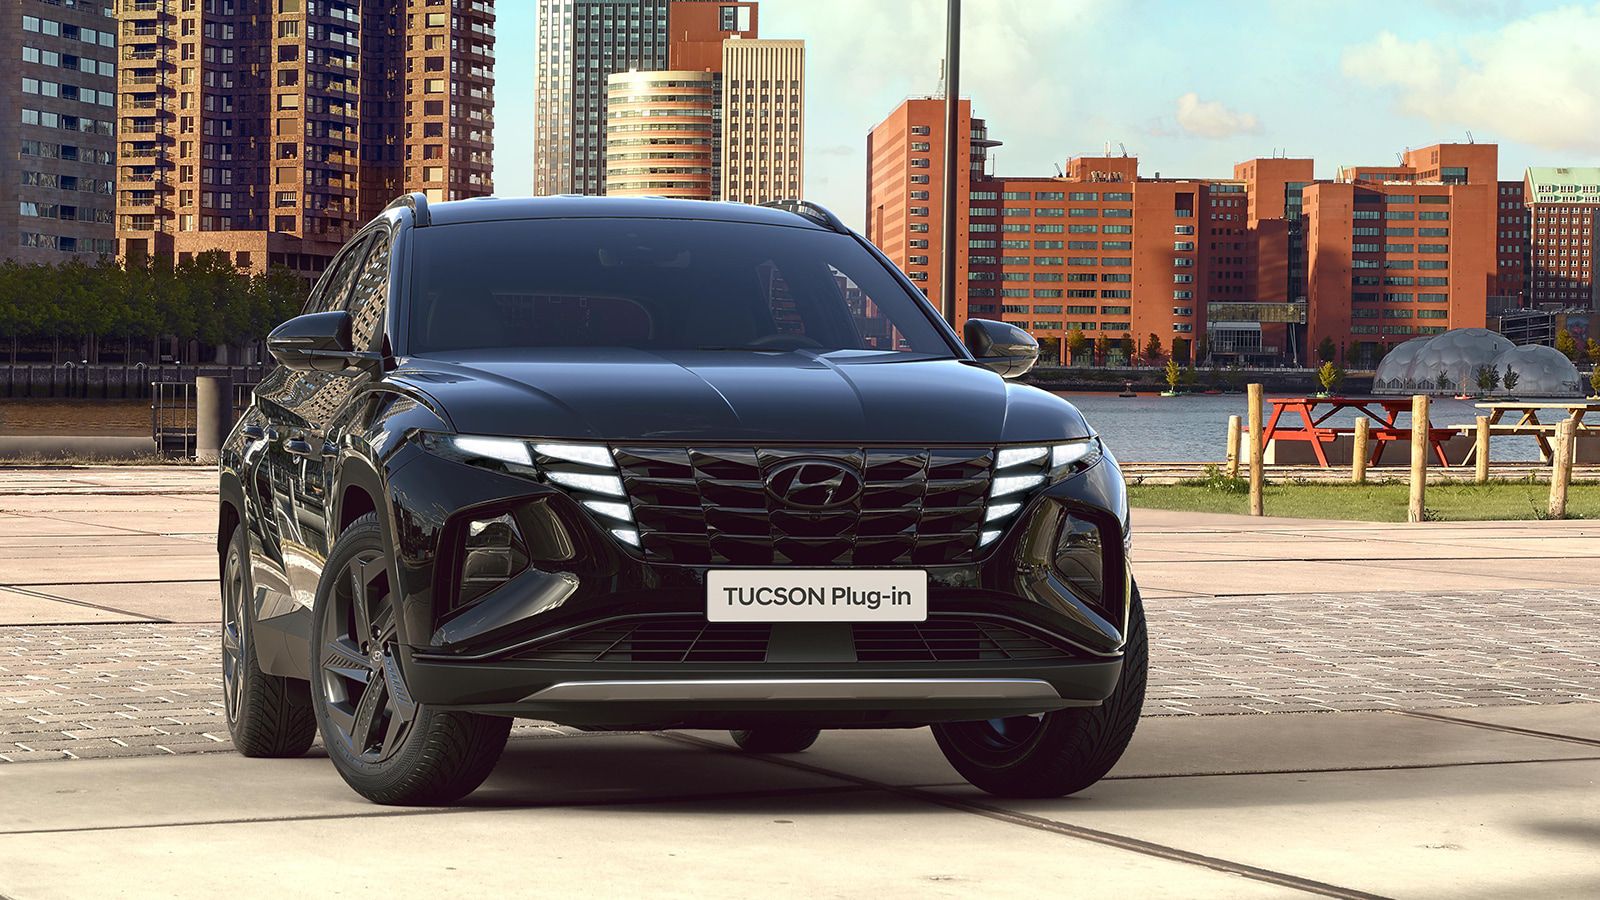 Hyundai TUCSON Plug-in Hybrid in Phantom Black Pearl pictured from the front